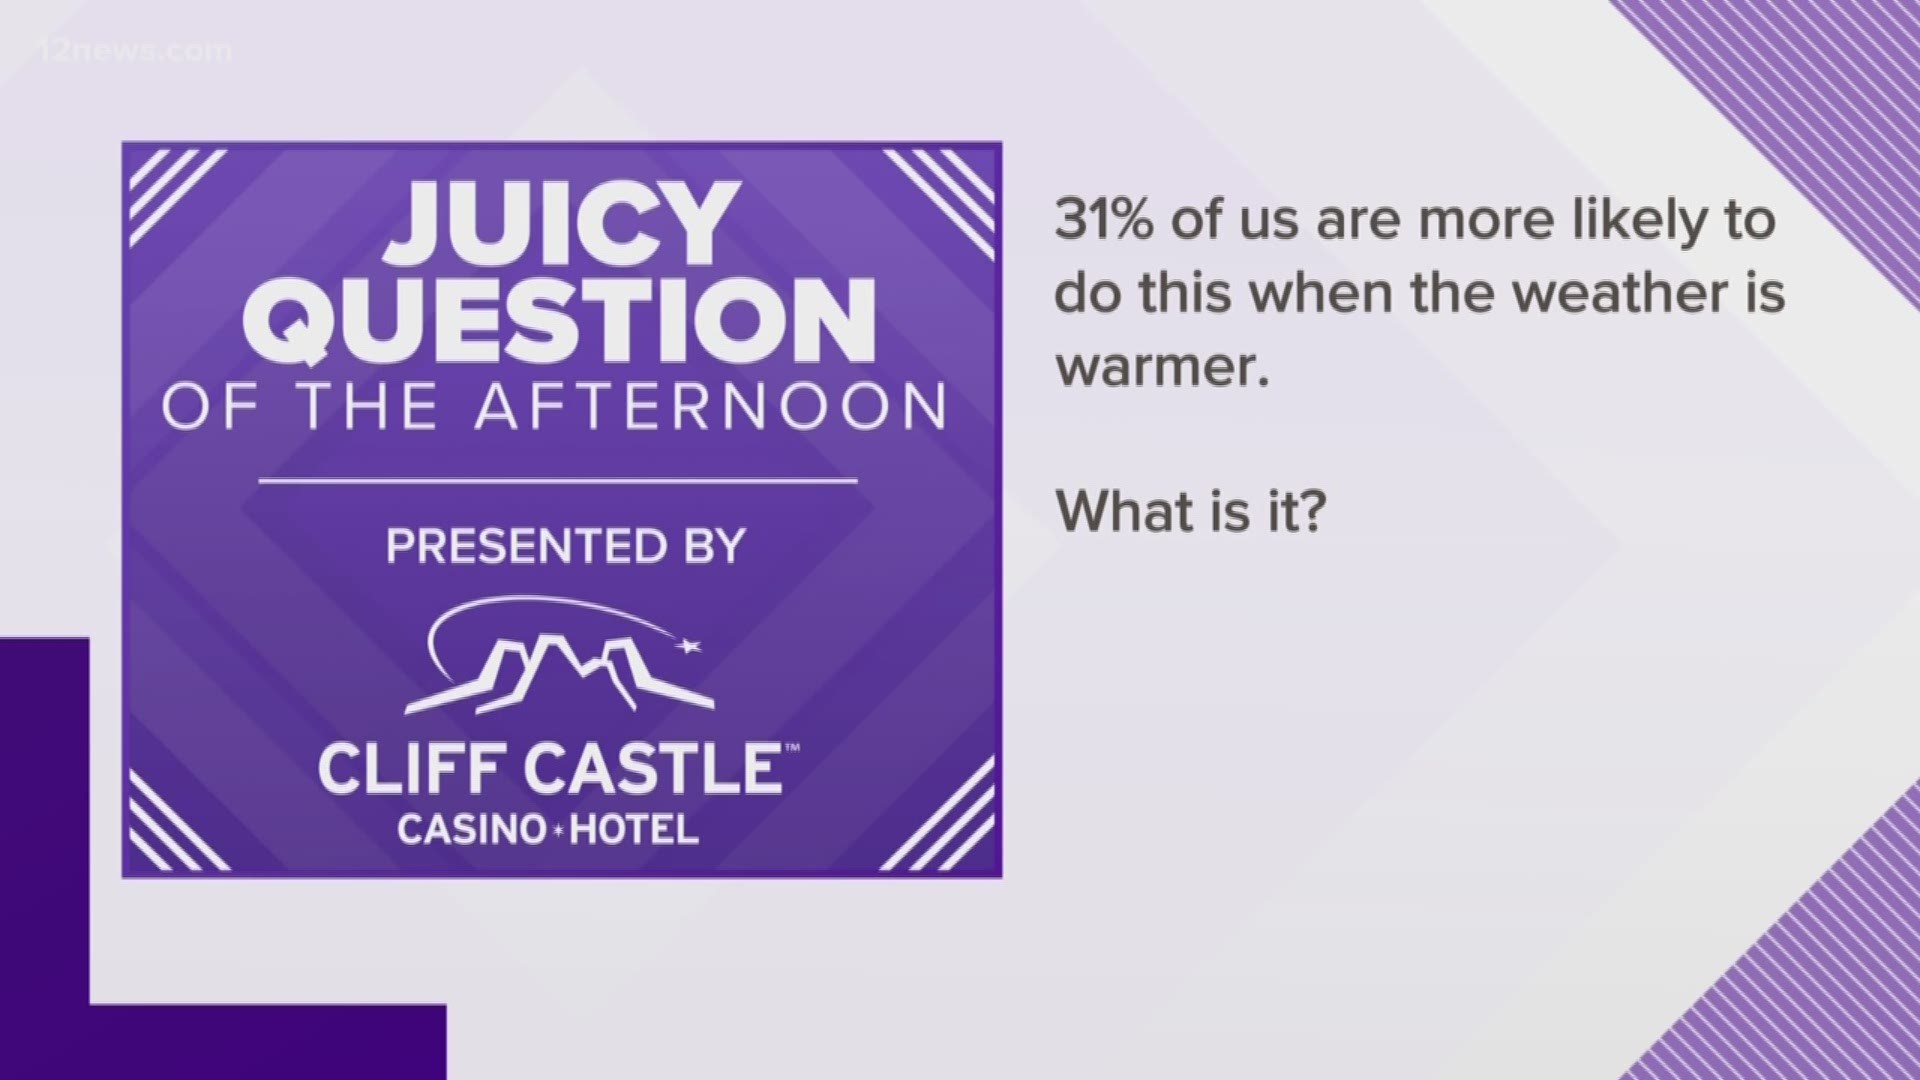 31% of us are more likely to do THIS when the weather is warmer. What is it?